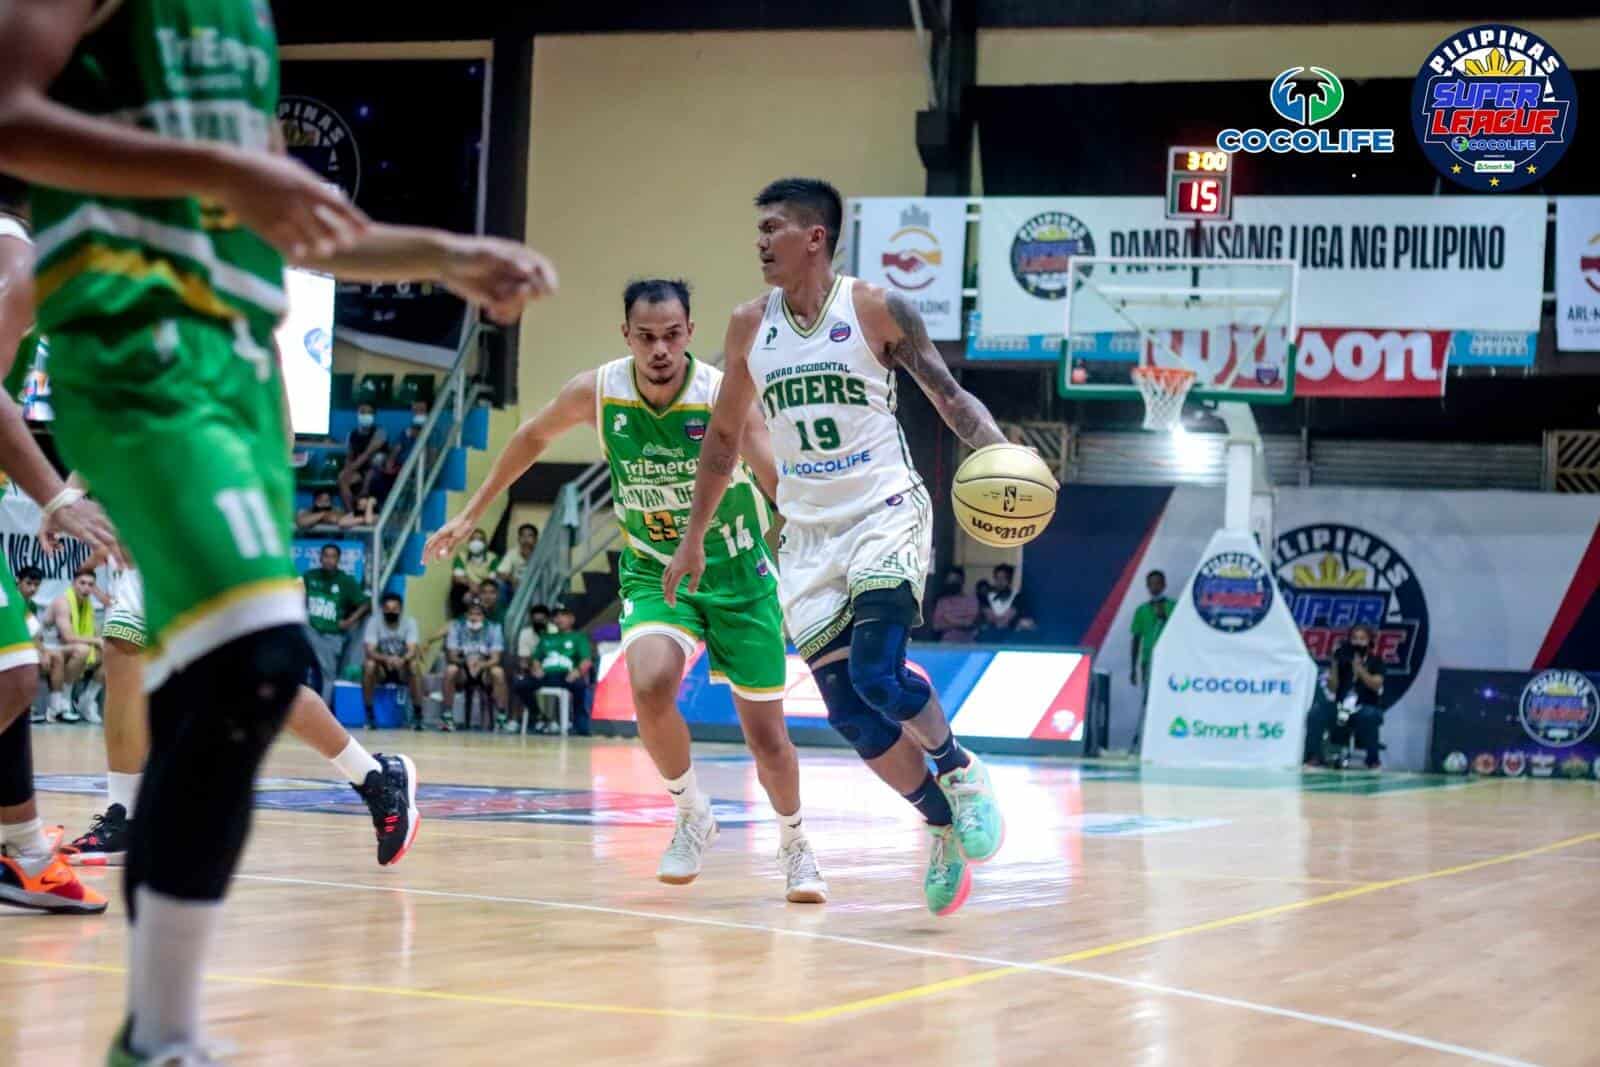 A basketball player dribbles the ball on a court in Game 1 of PSL Finals.